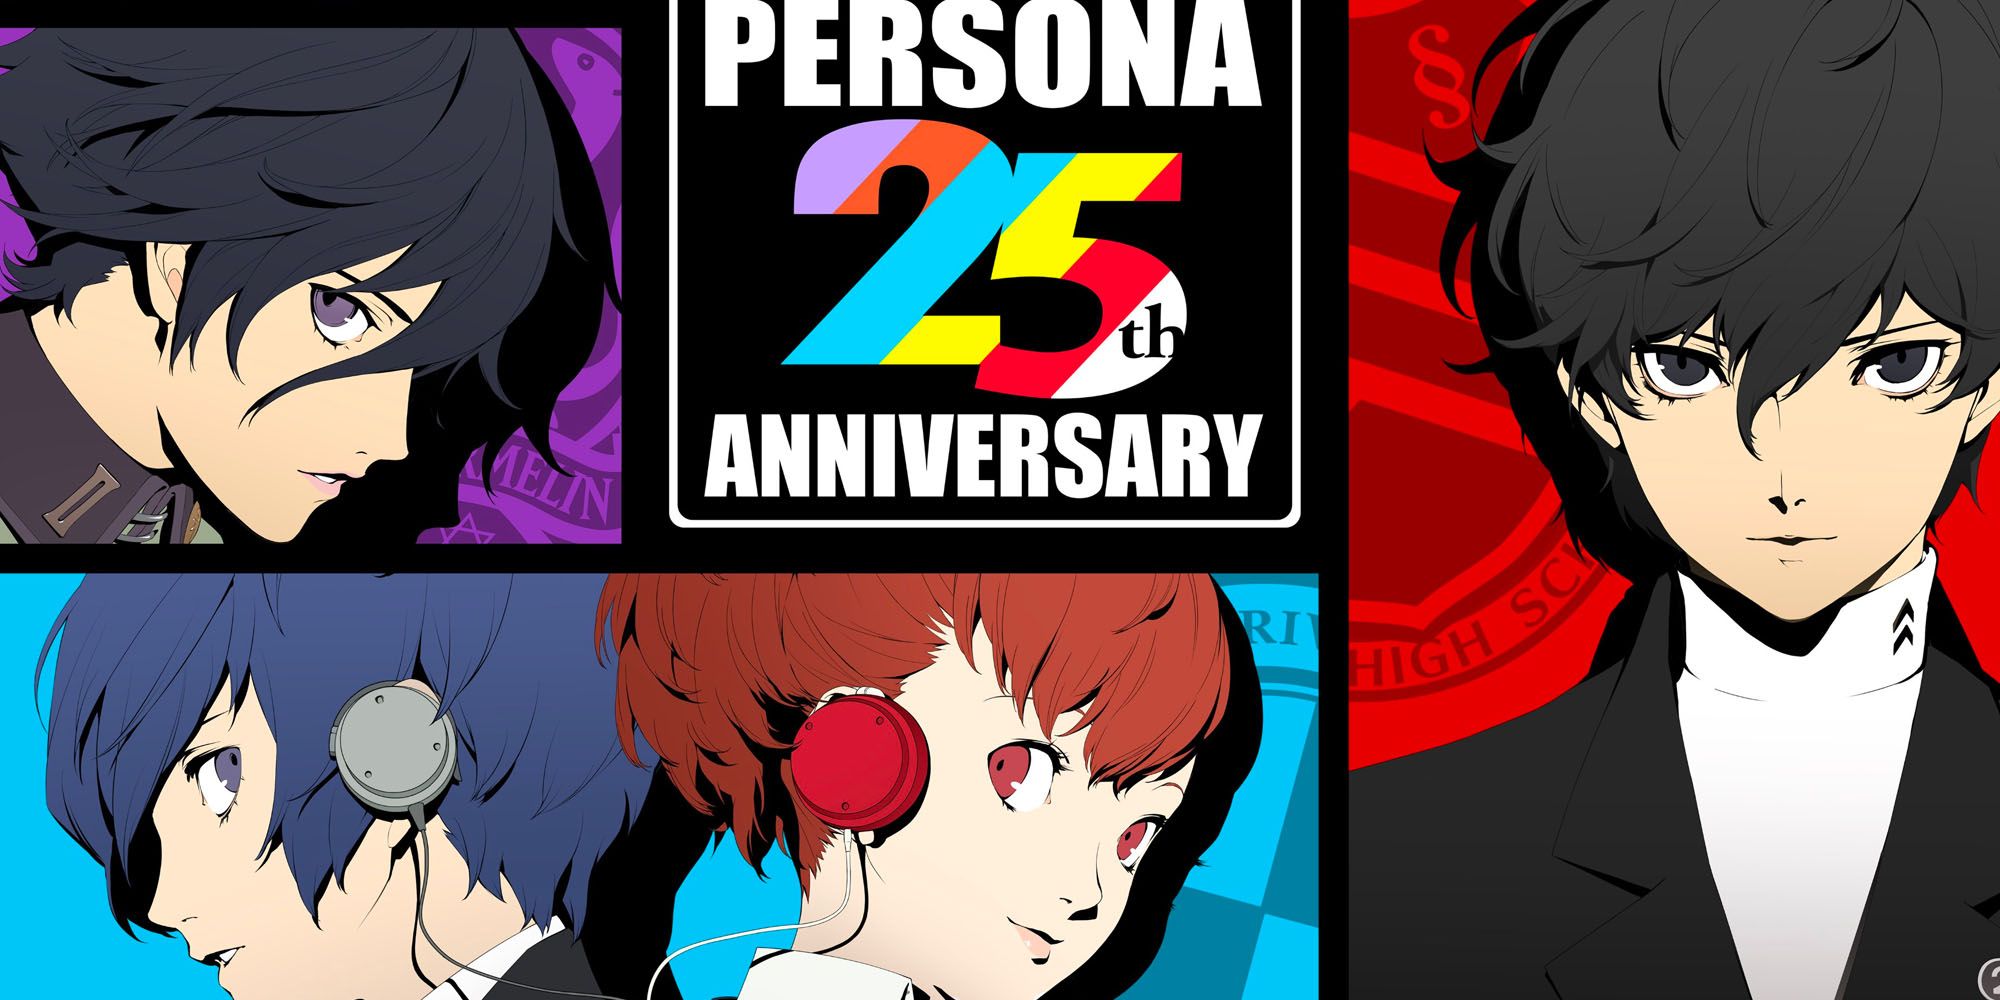 Will Atlus Announce Person 6 During 25th Anniversary